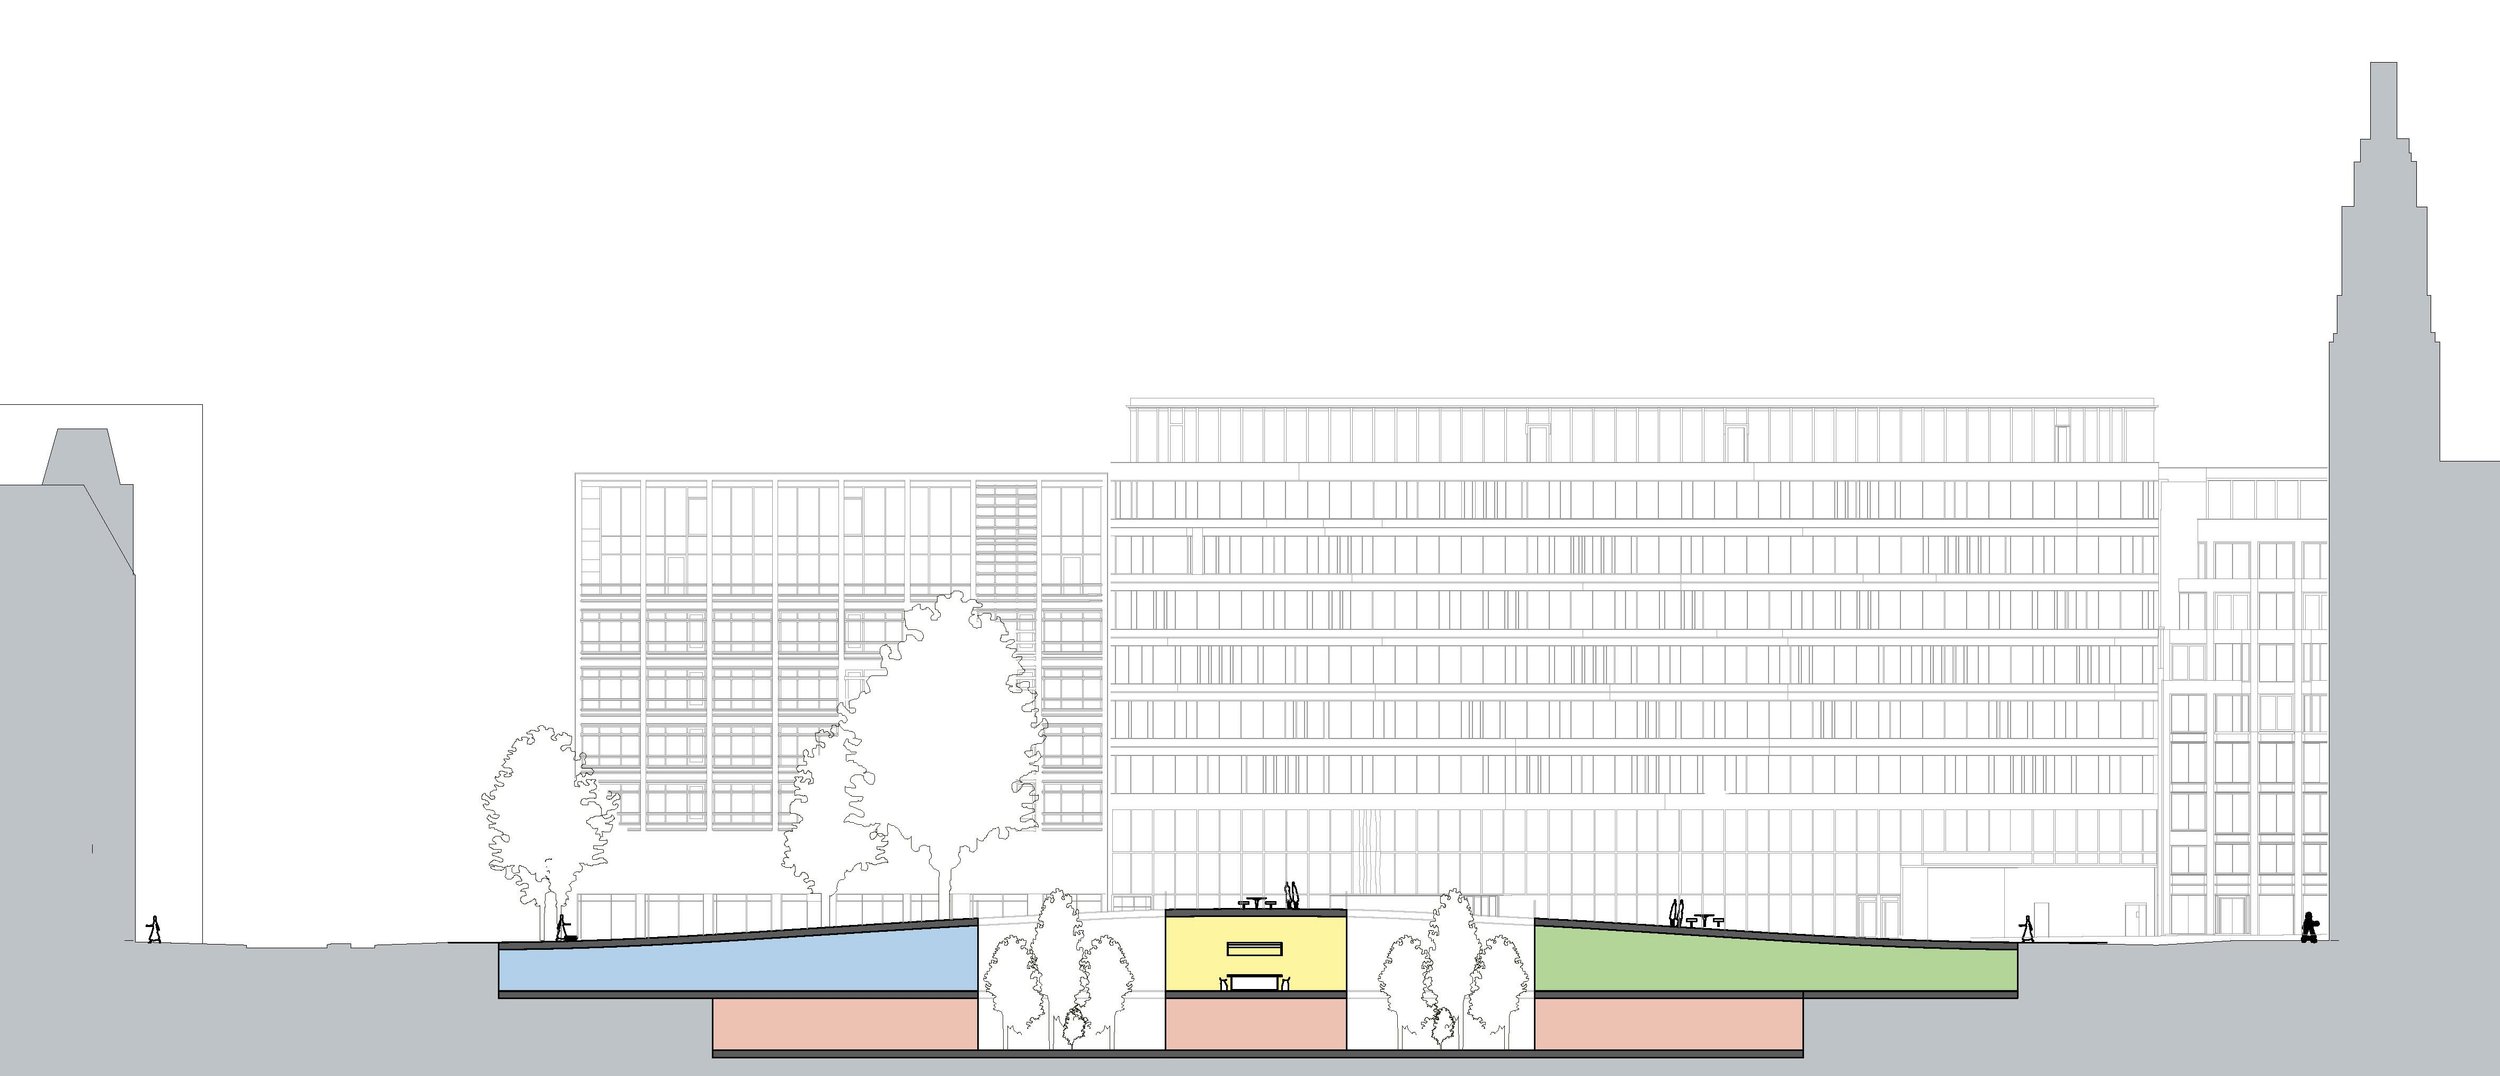 WOMO Architects London Finsbury Square Mixed-use Transformation New Section